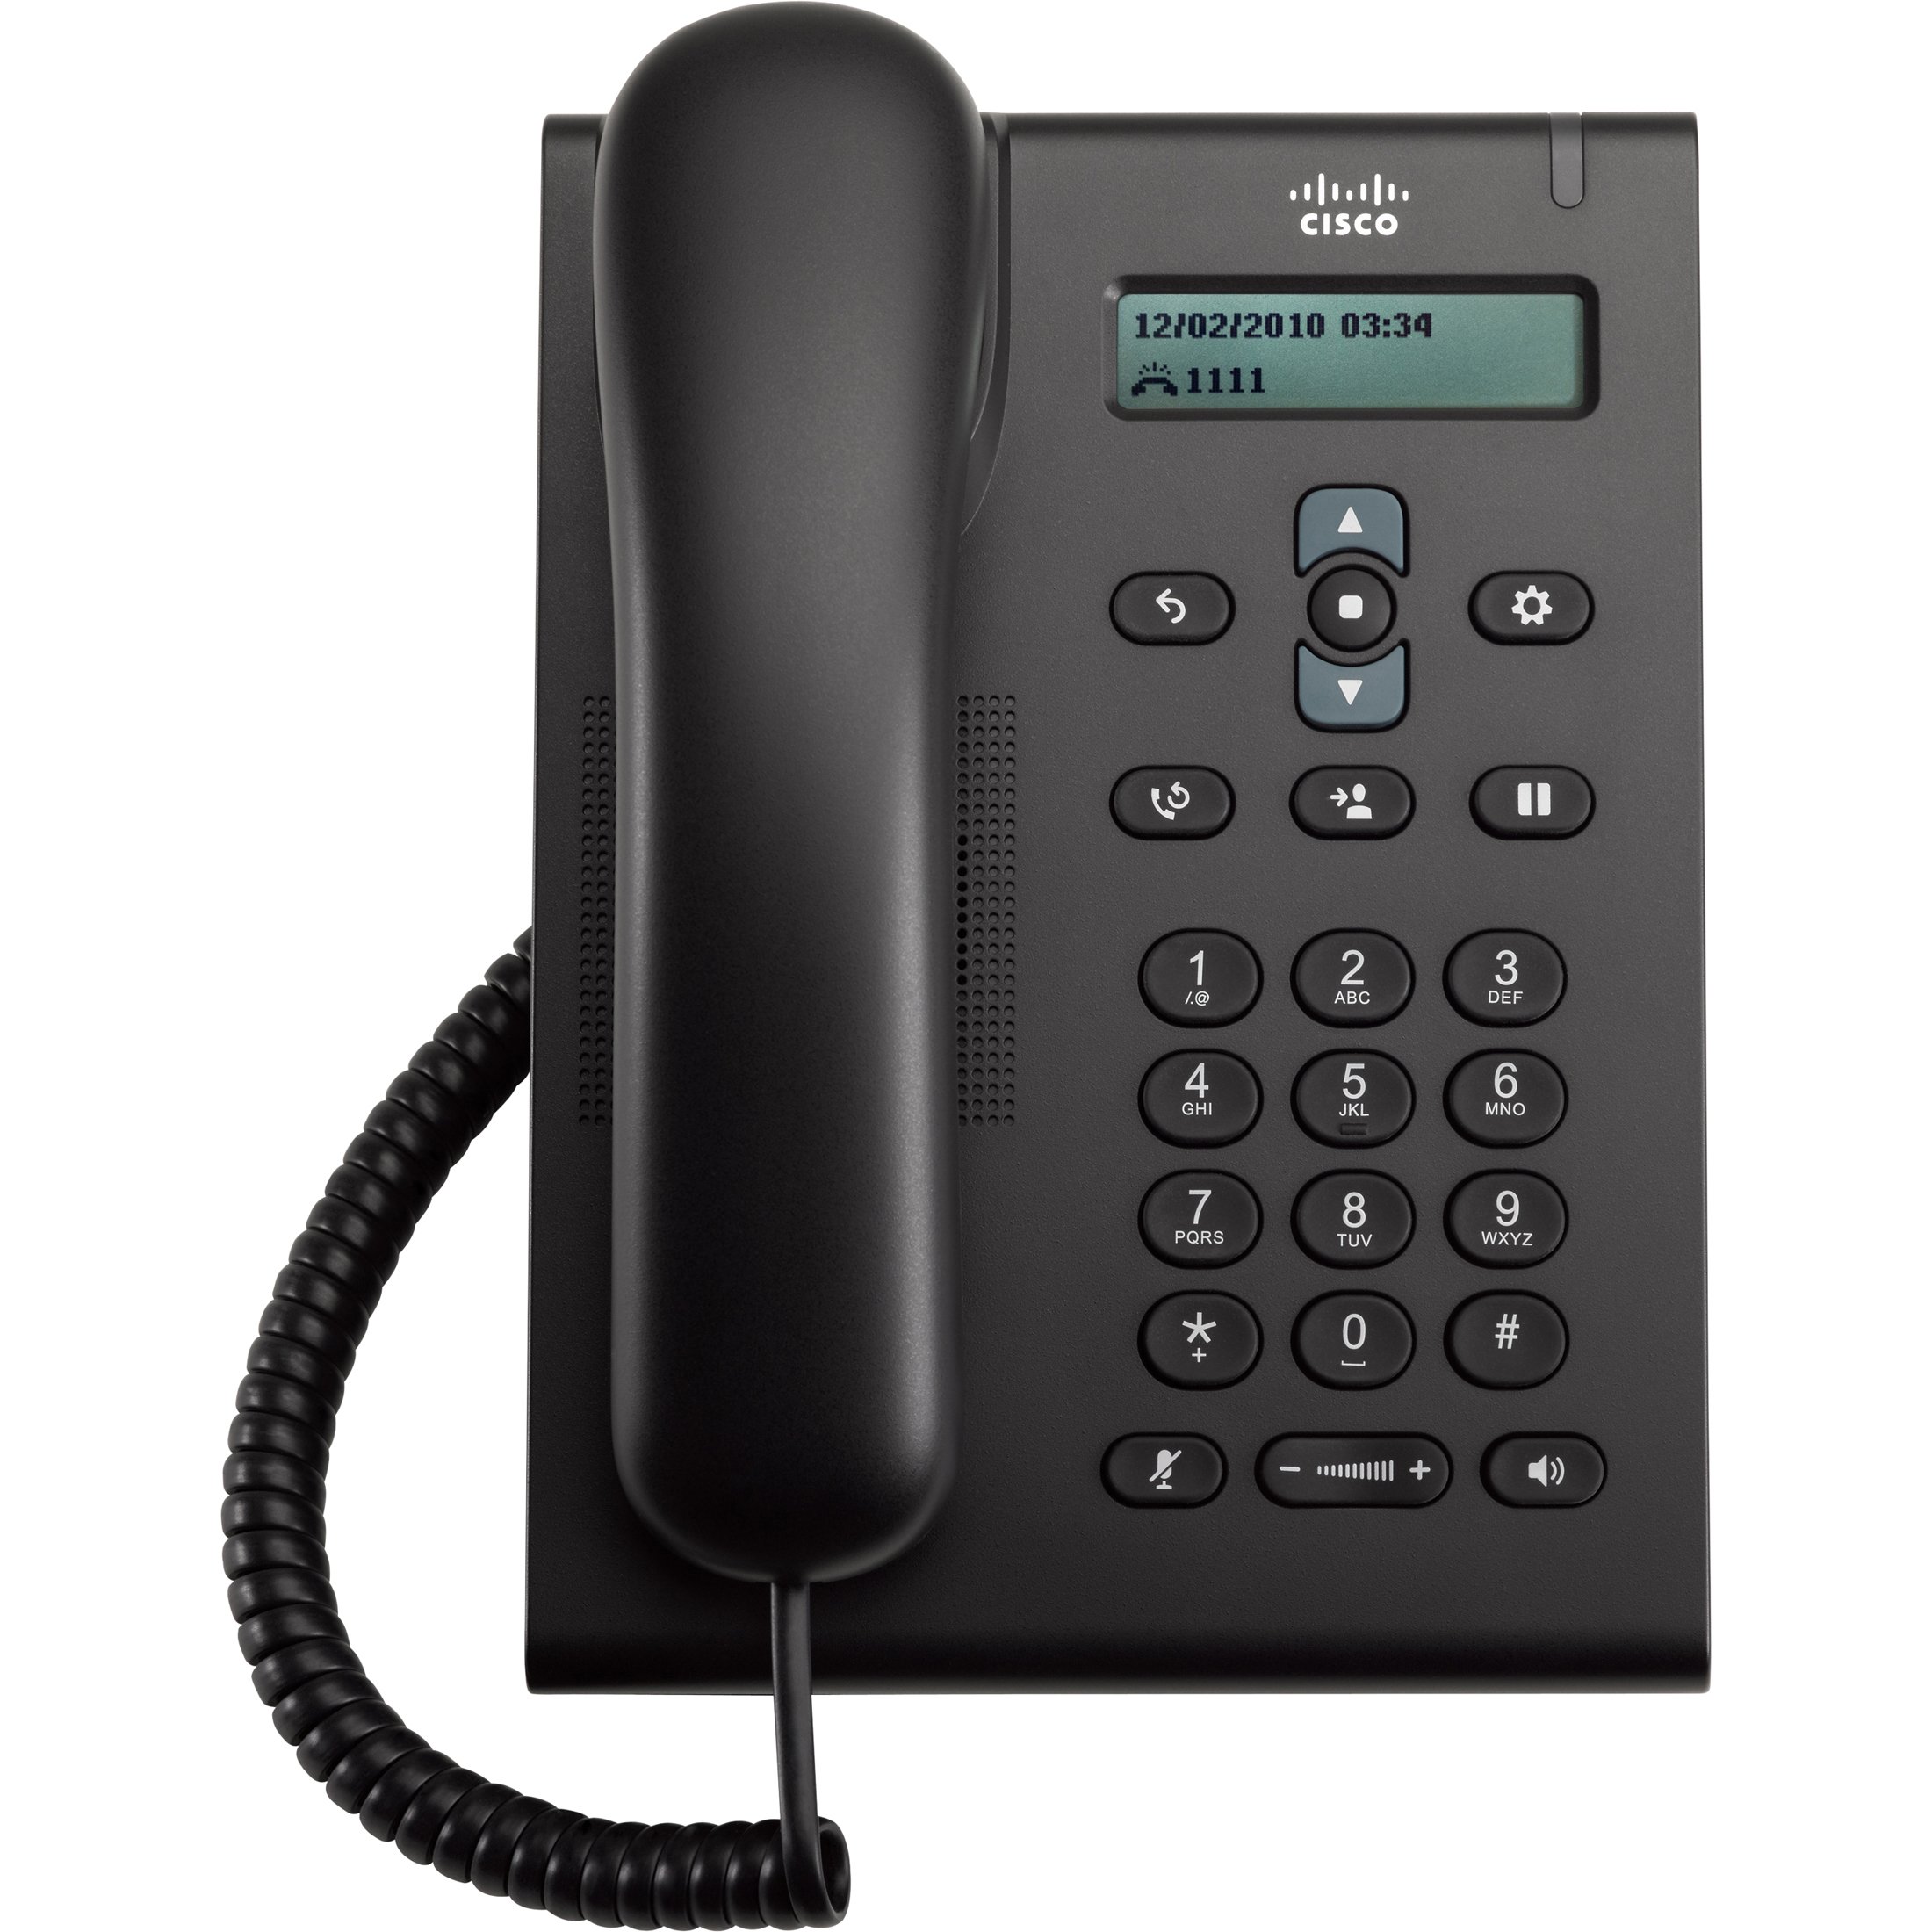 SPARE HANDSET FOR CISCO UNIFIED